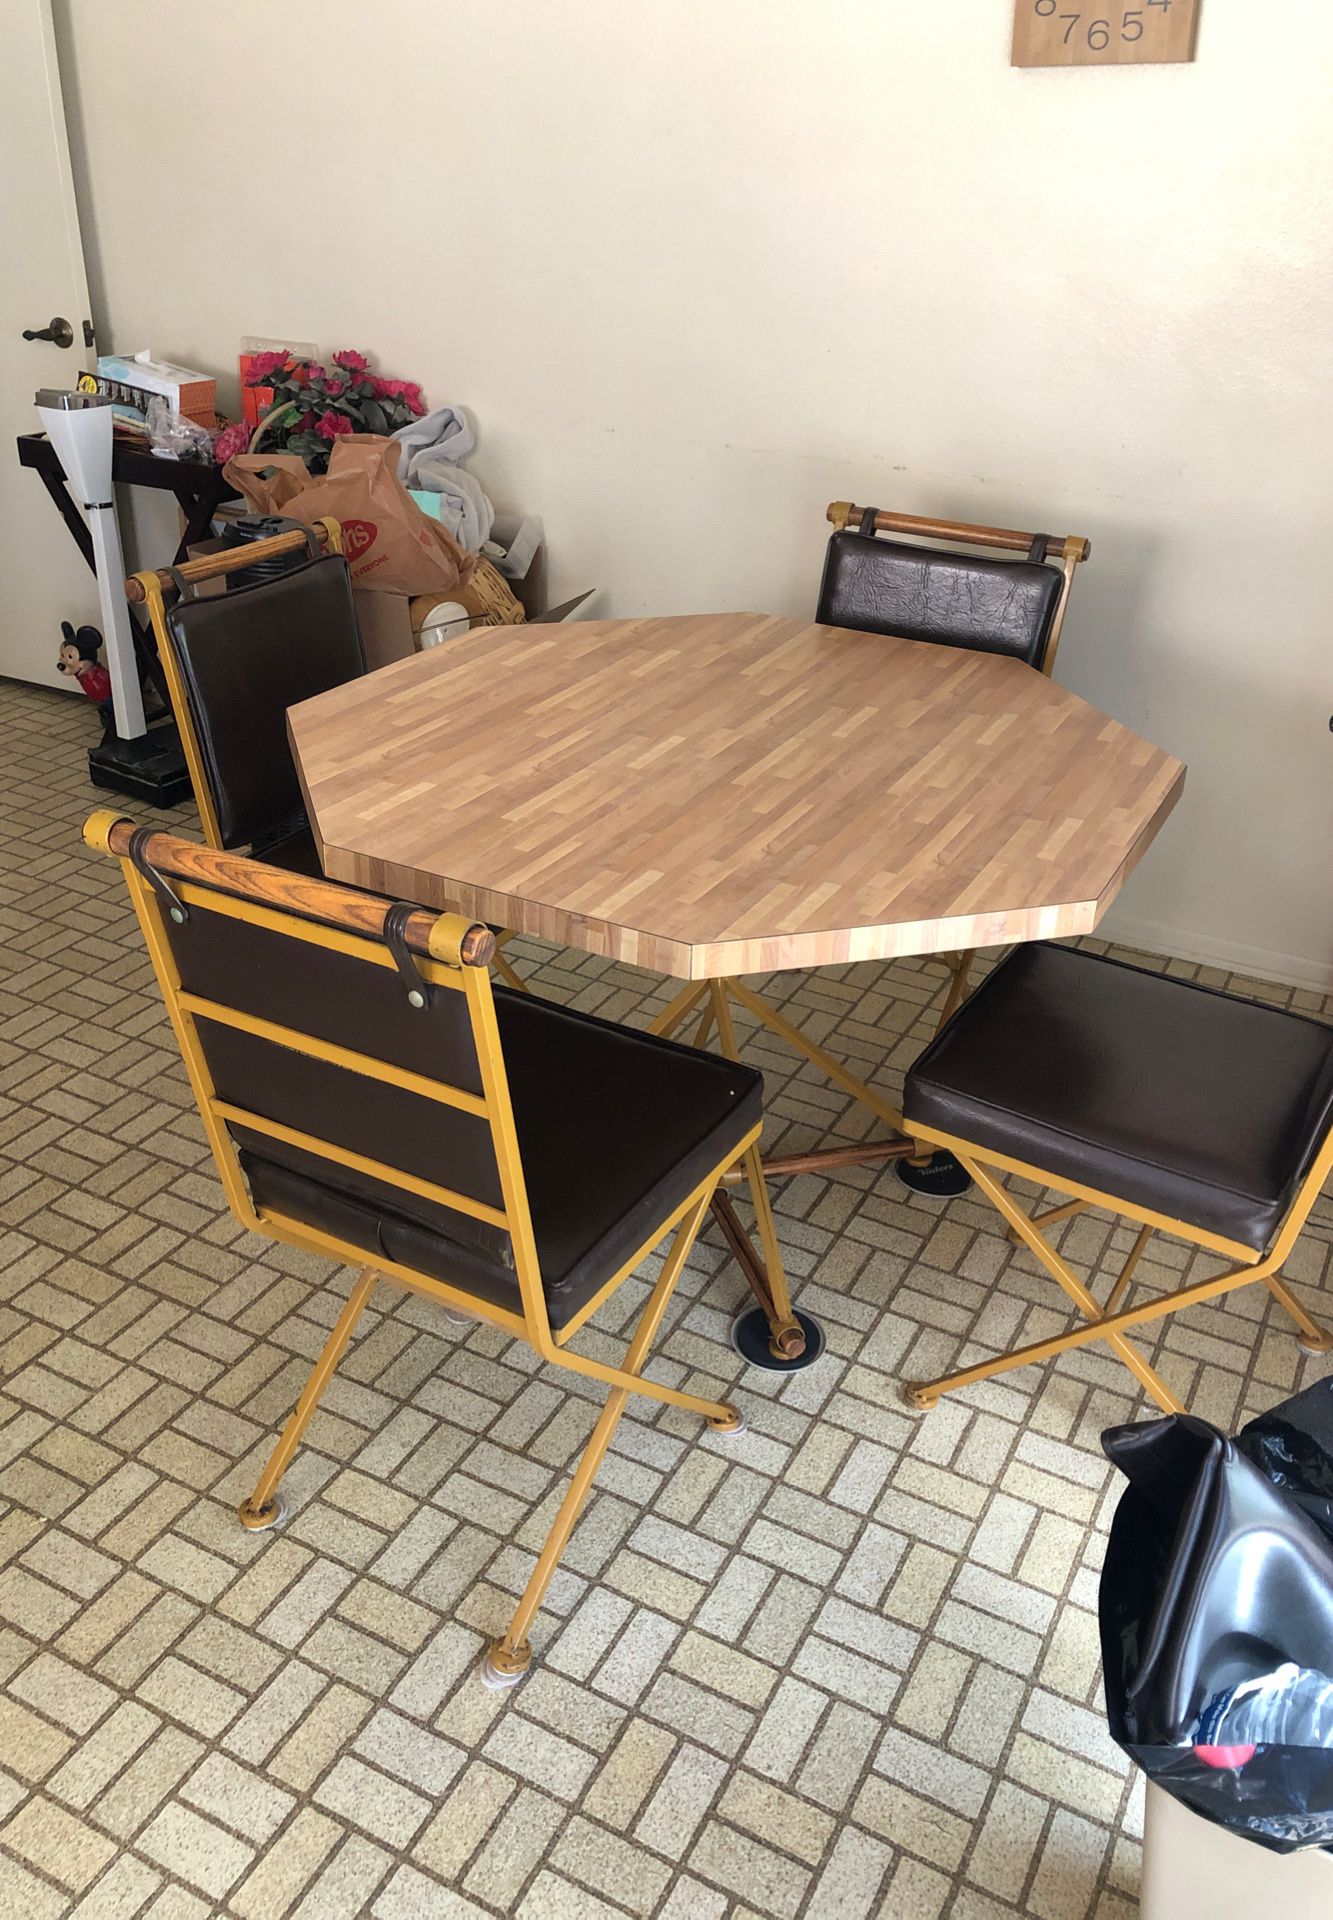 Kitchen table and matching chairs retro 70 style $150. Obo